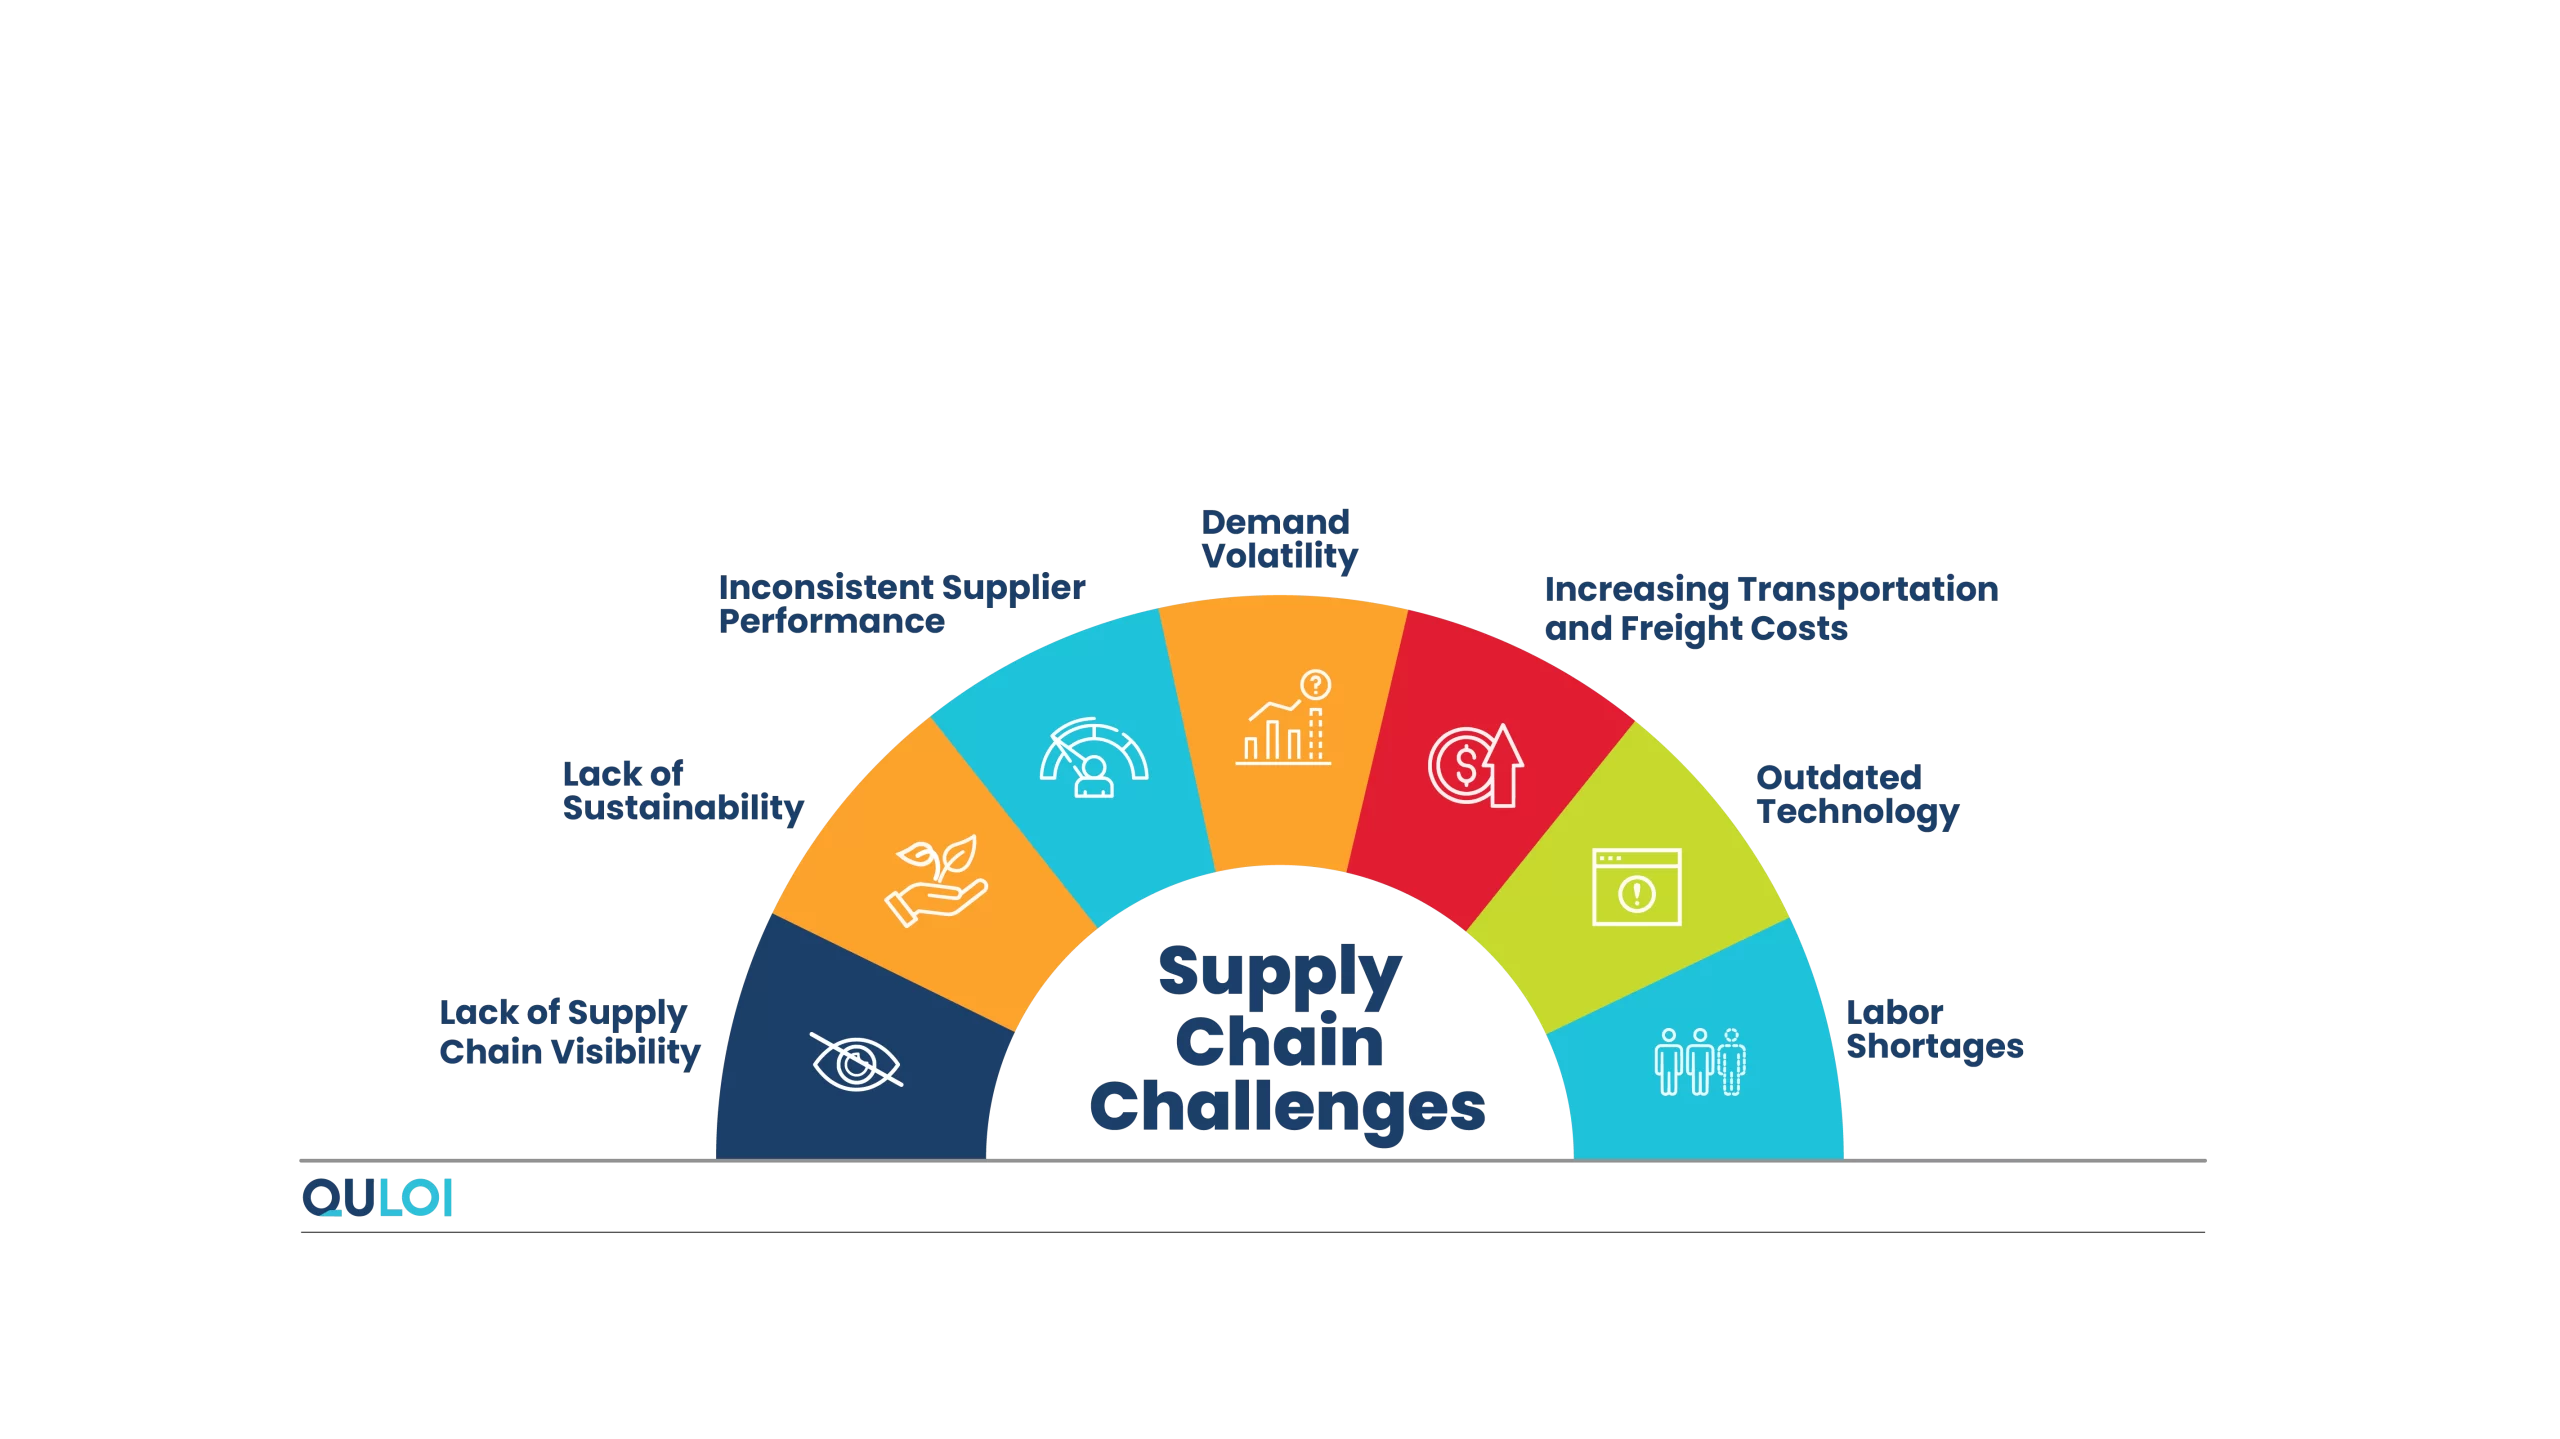 Key Supply Chain Challenges